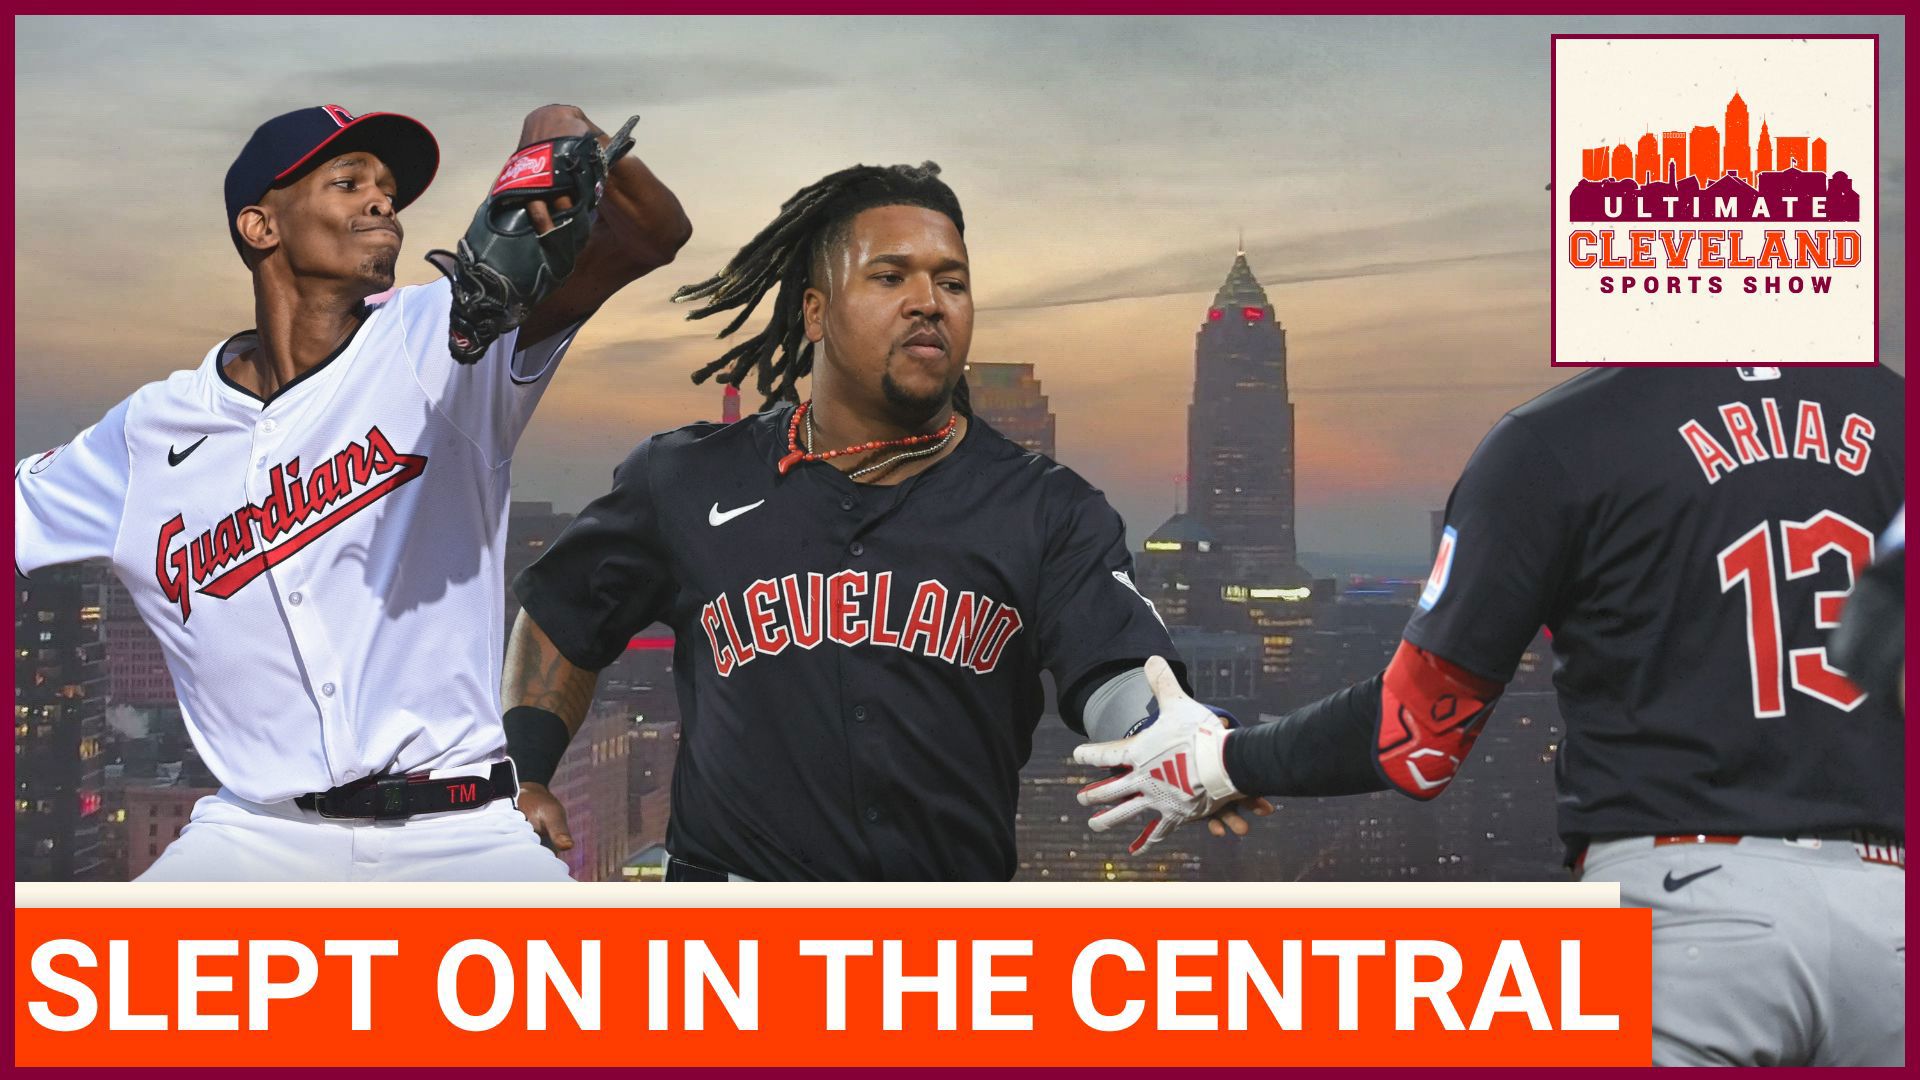 The Cleveland Guardians are in 1st place in the AL Central, which is the surprise division in all of baseball.